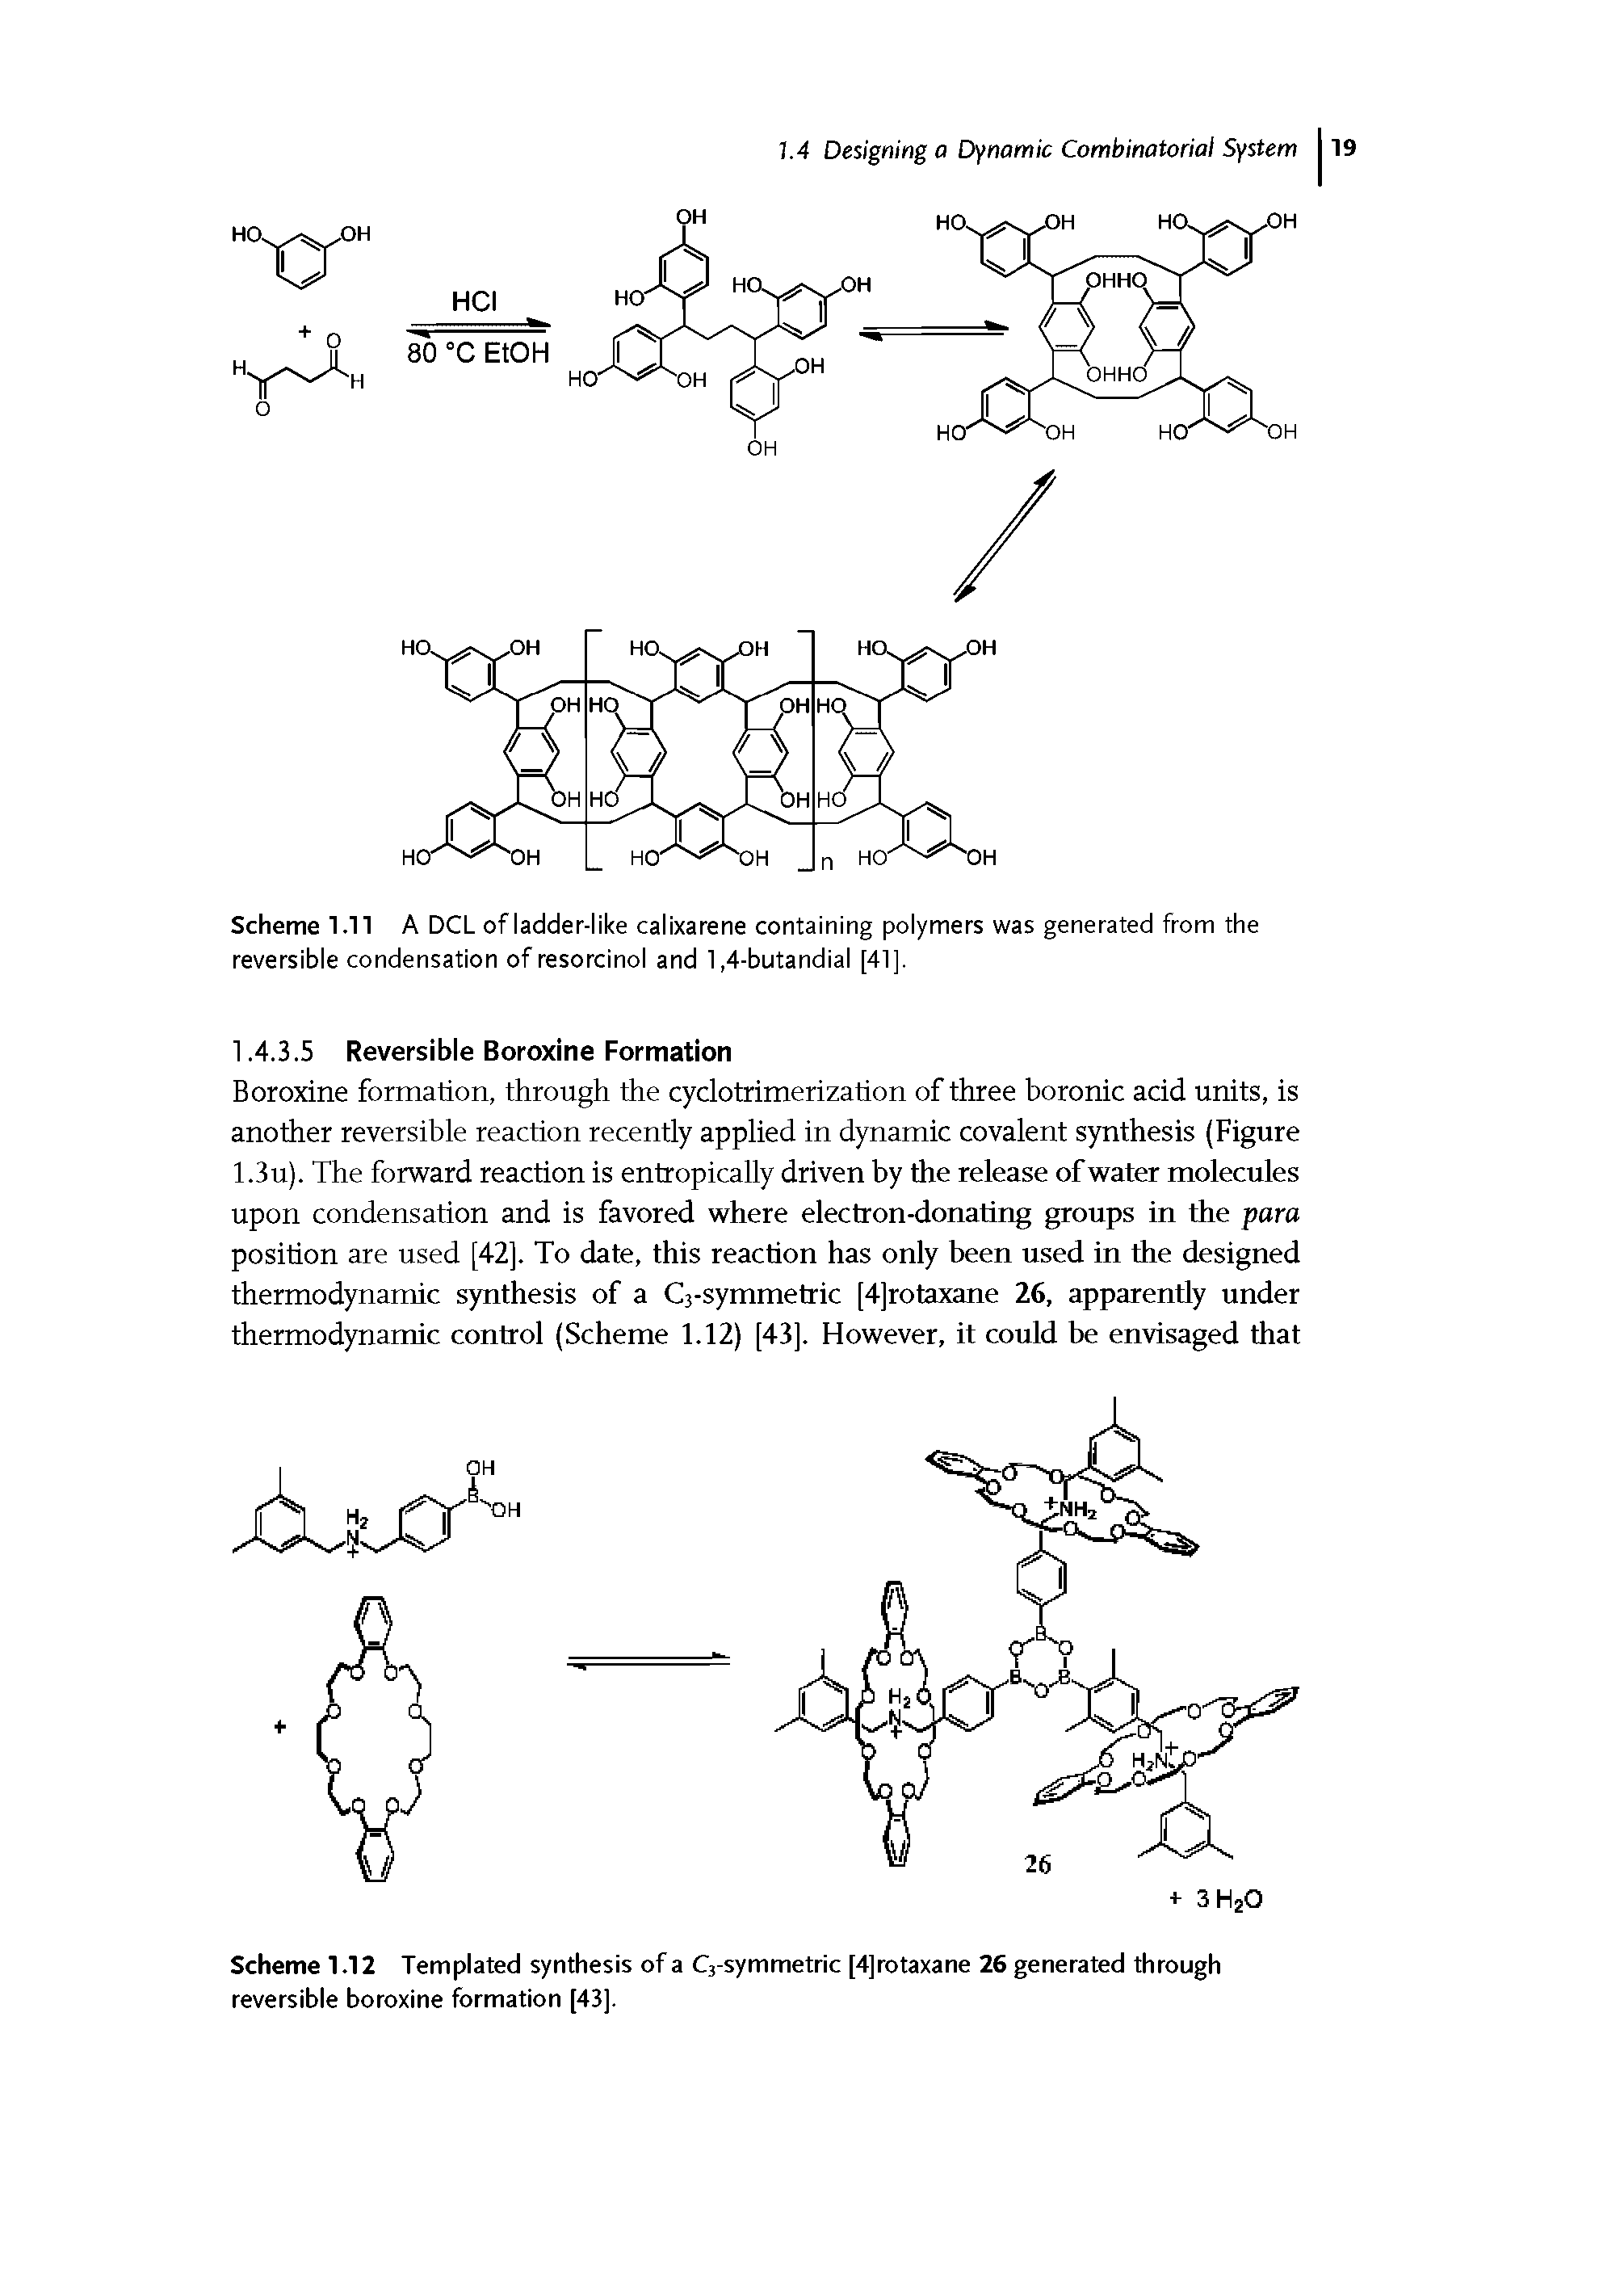 Scheme 1.12 Templated synthesis of a Cs-symmetric [4]rotaxane 26 generated through reversible boroxine formation [43].